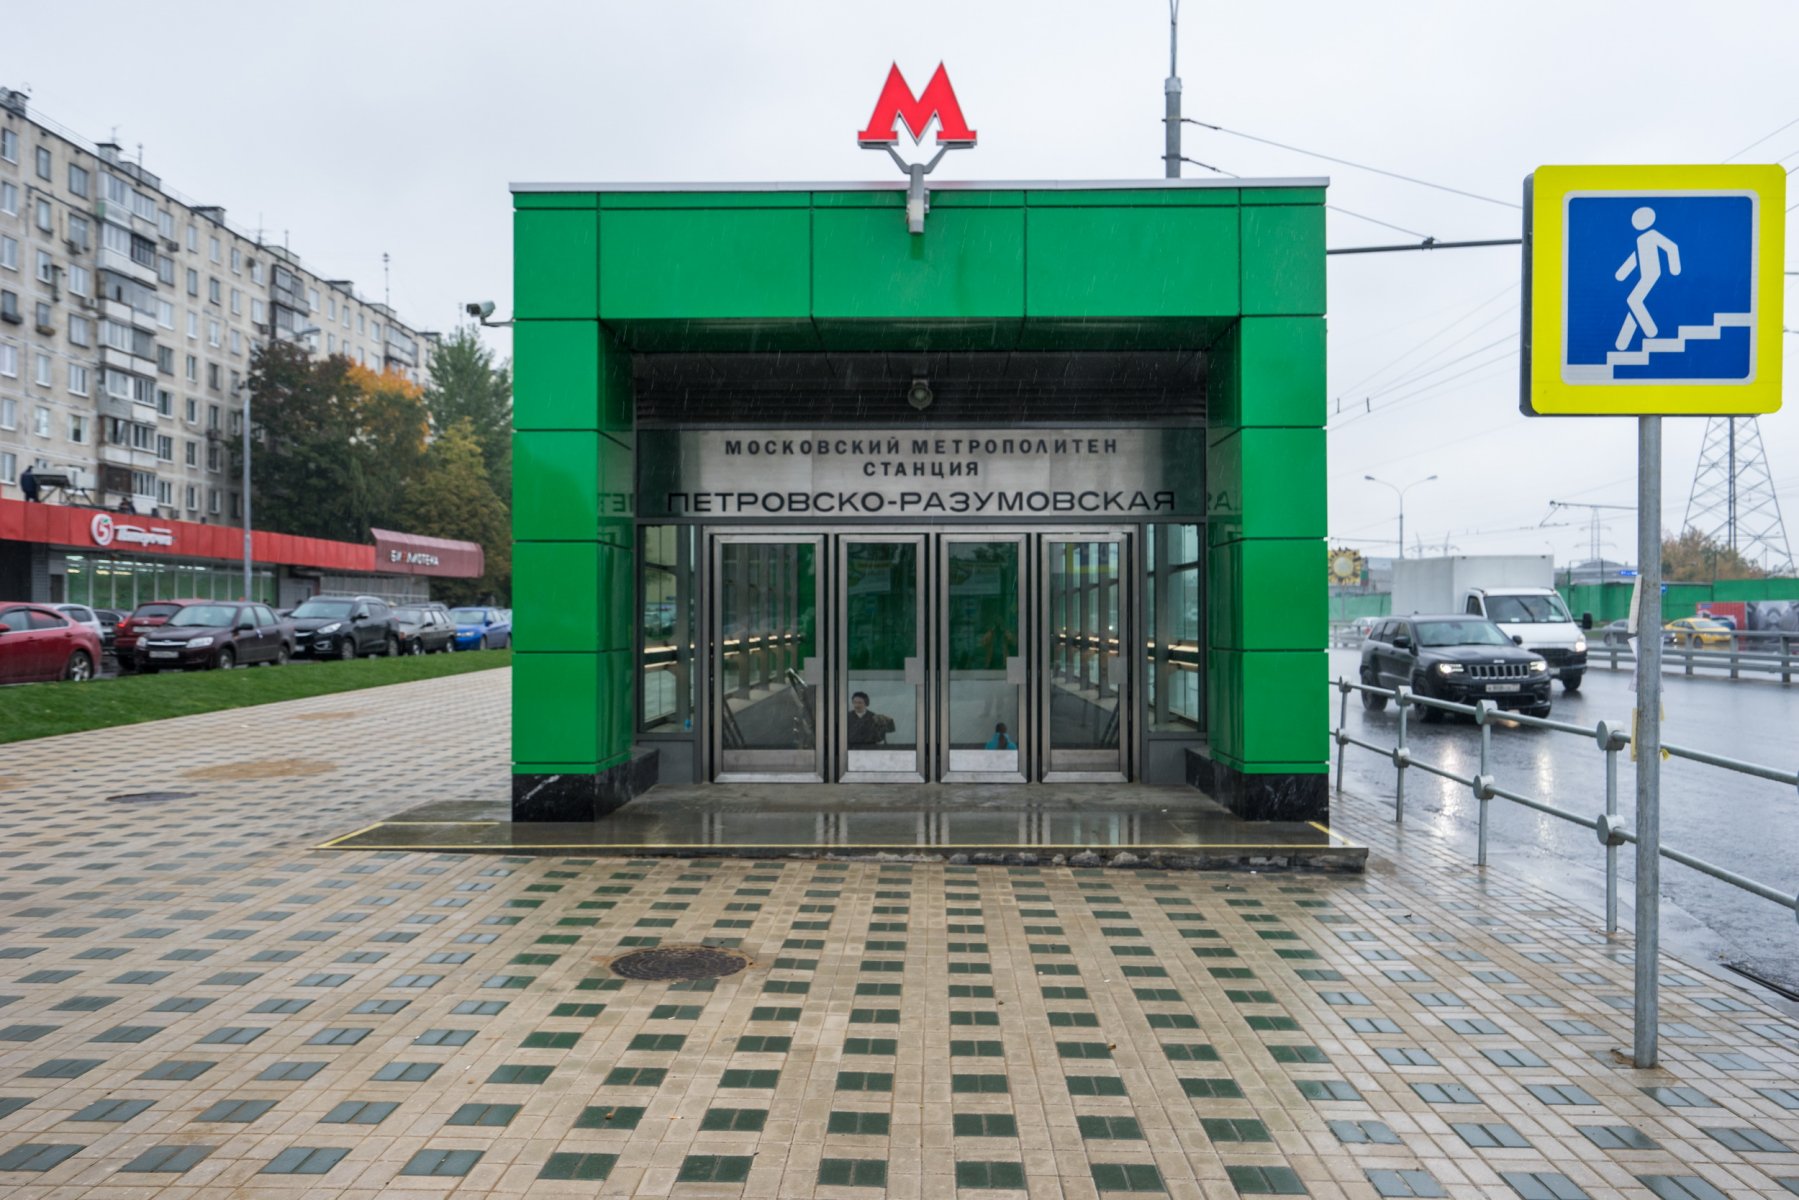 February tenders: 306 million rubles for biometric control cameras of the Moscow metro turnstile complex